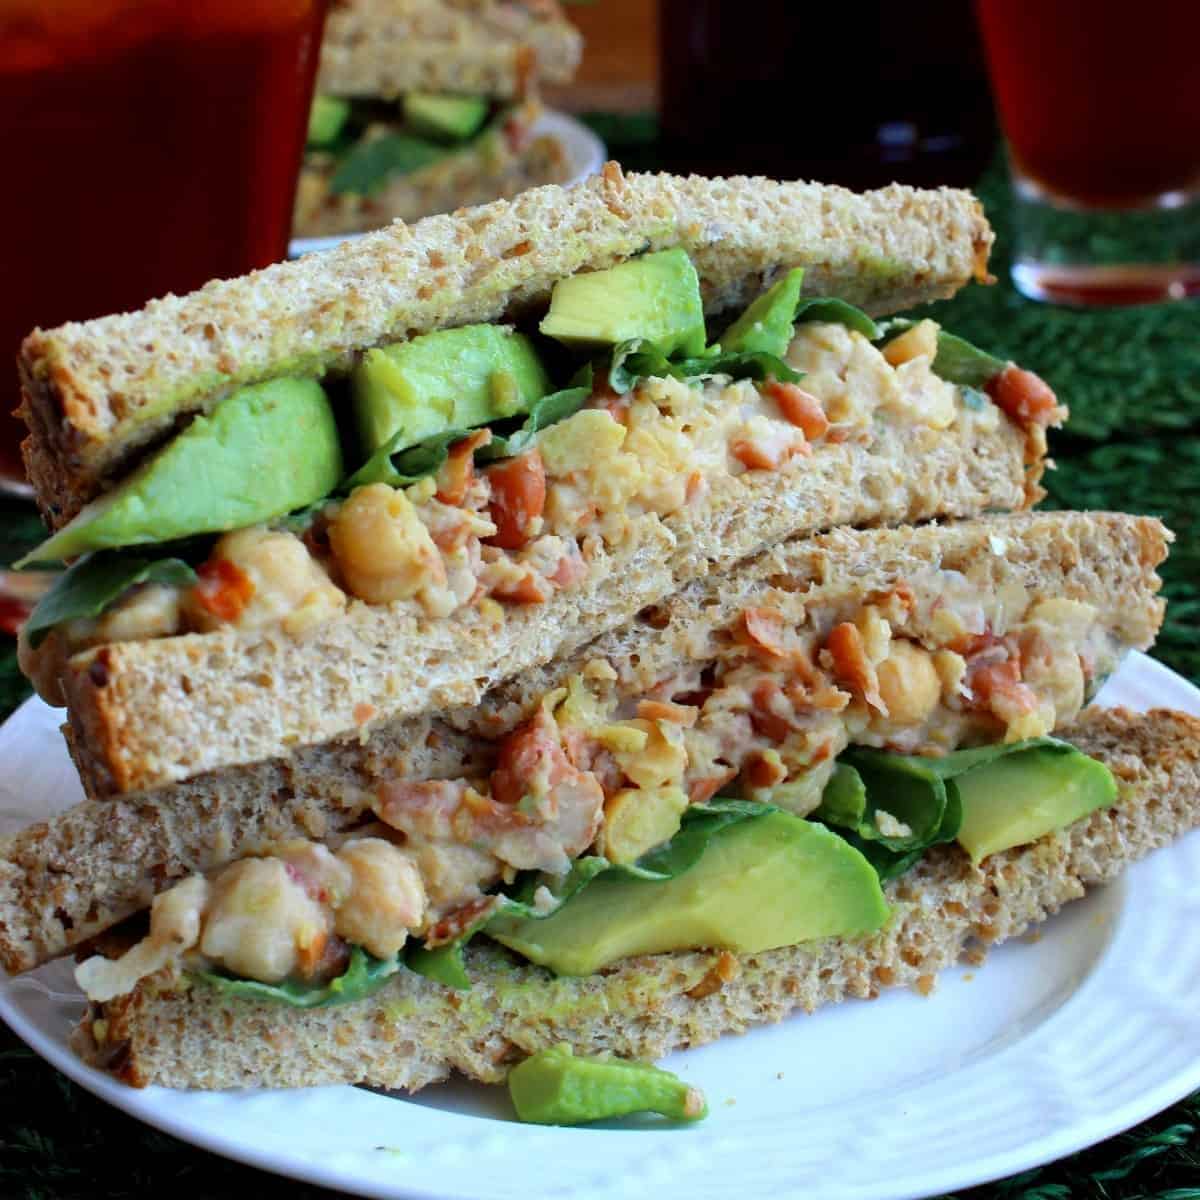 Two chickpea salad sandwich halves stacked on top of each other to show the veggies inside.